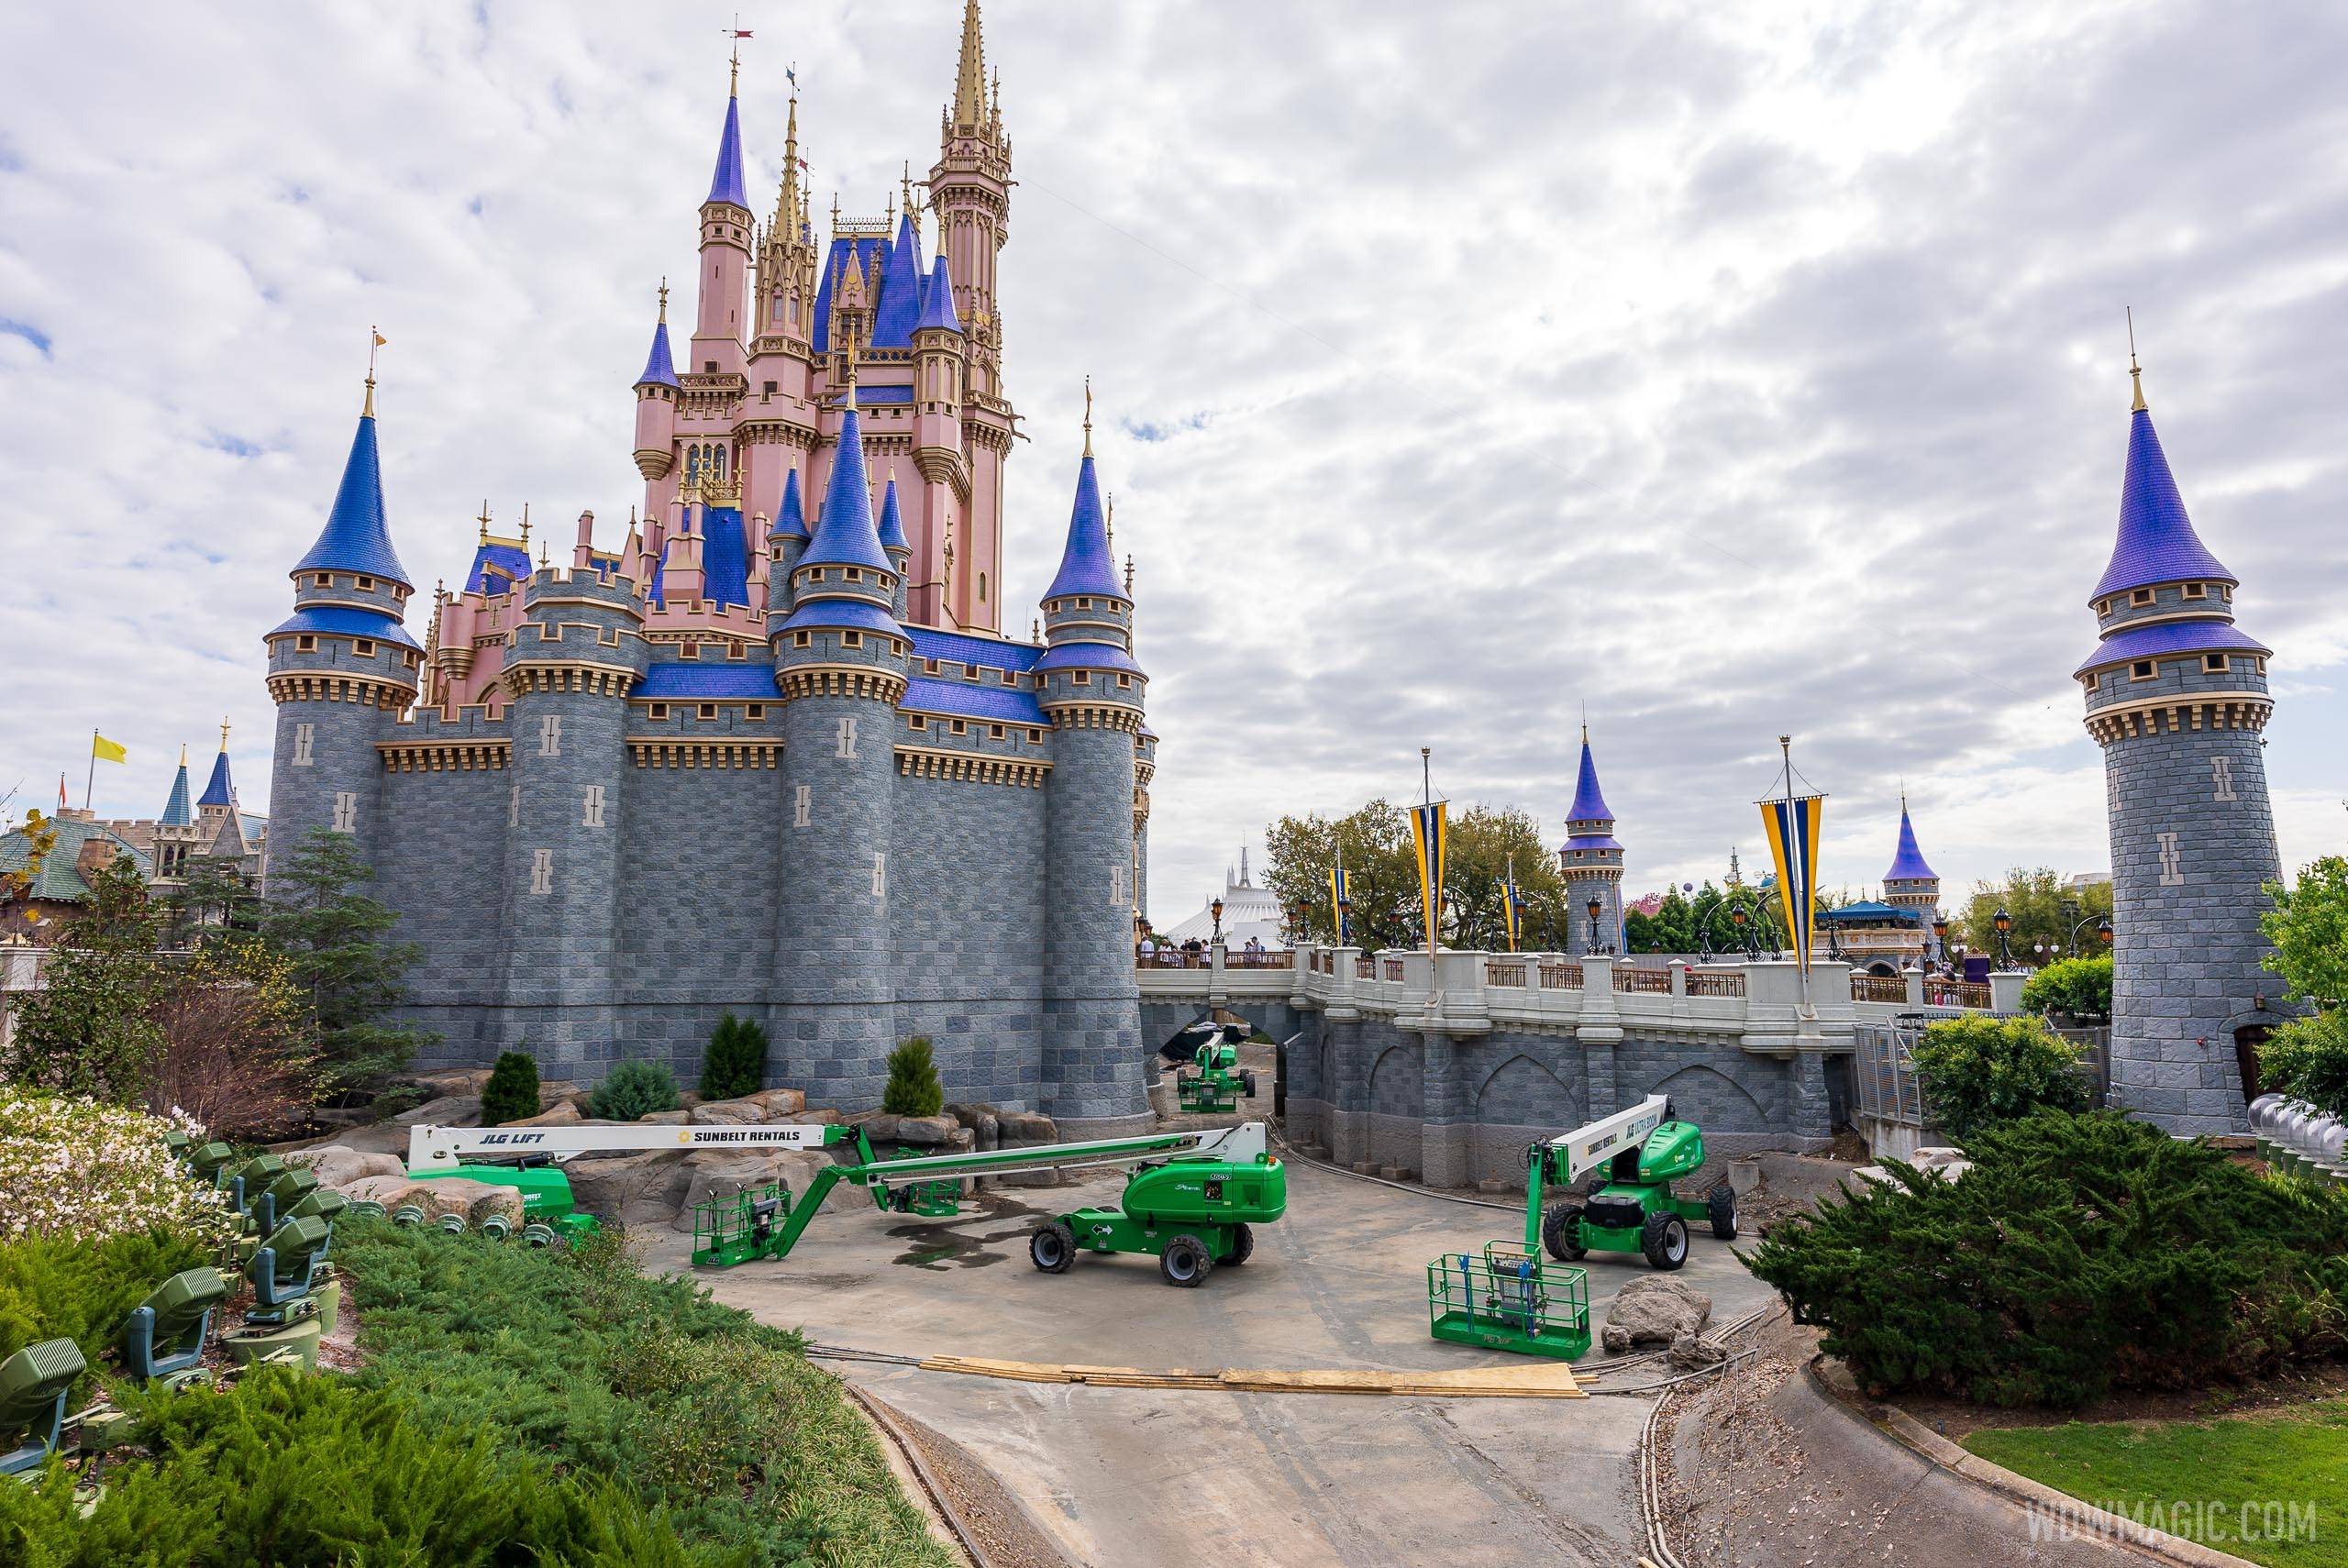 PHOTOS - Work at Cinderella Castle continues on the stage and moat